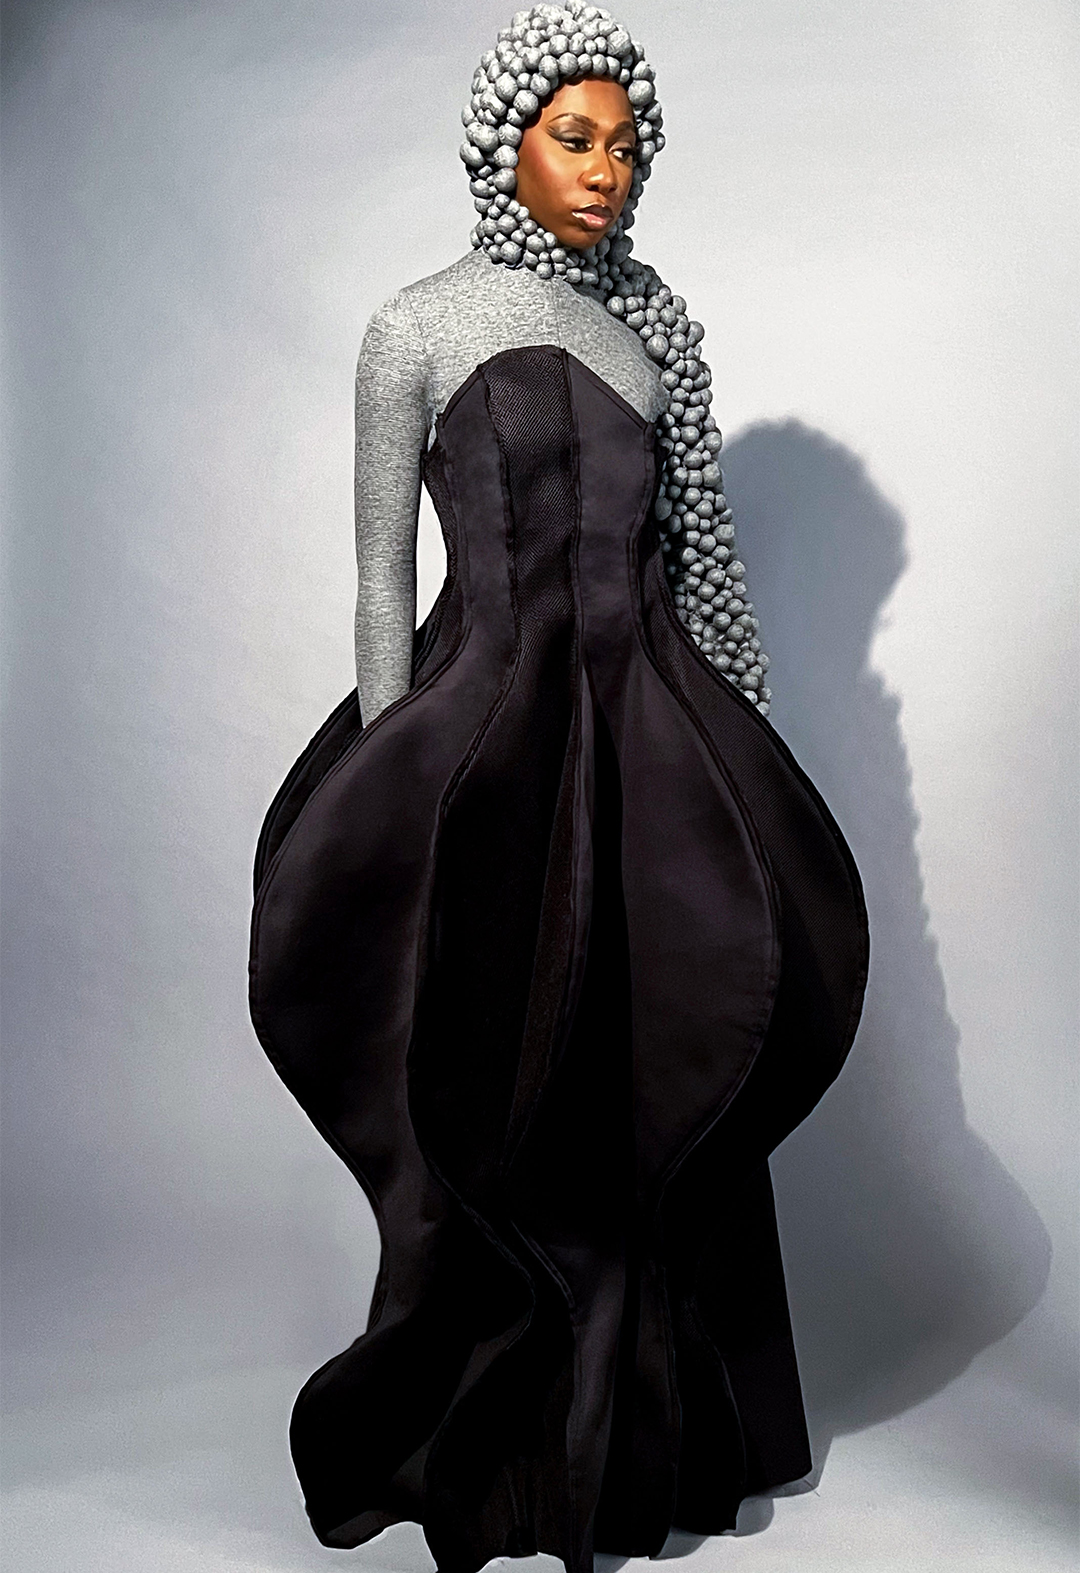 The photo shows a black neoprene and netting three-dimensional sculpted dress over a gray bubble scuba suit.